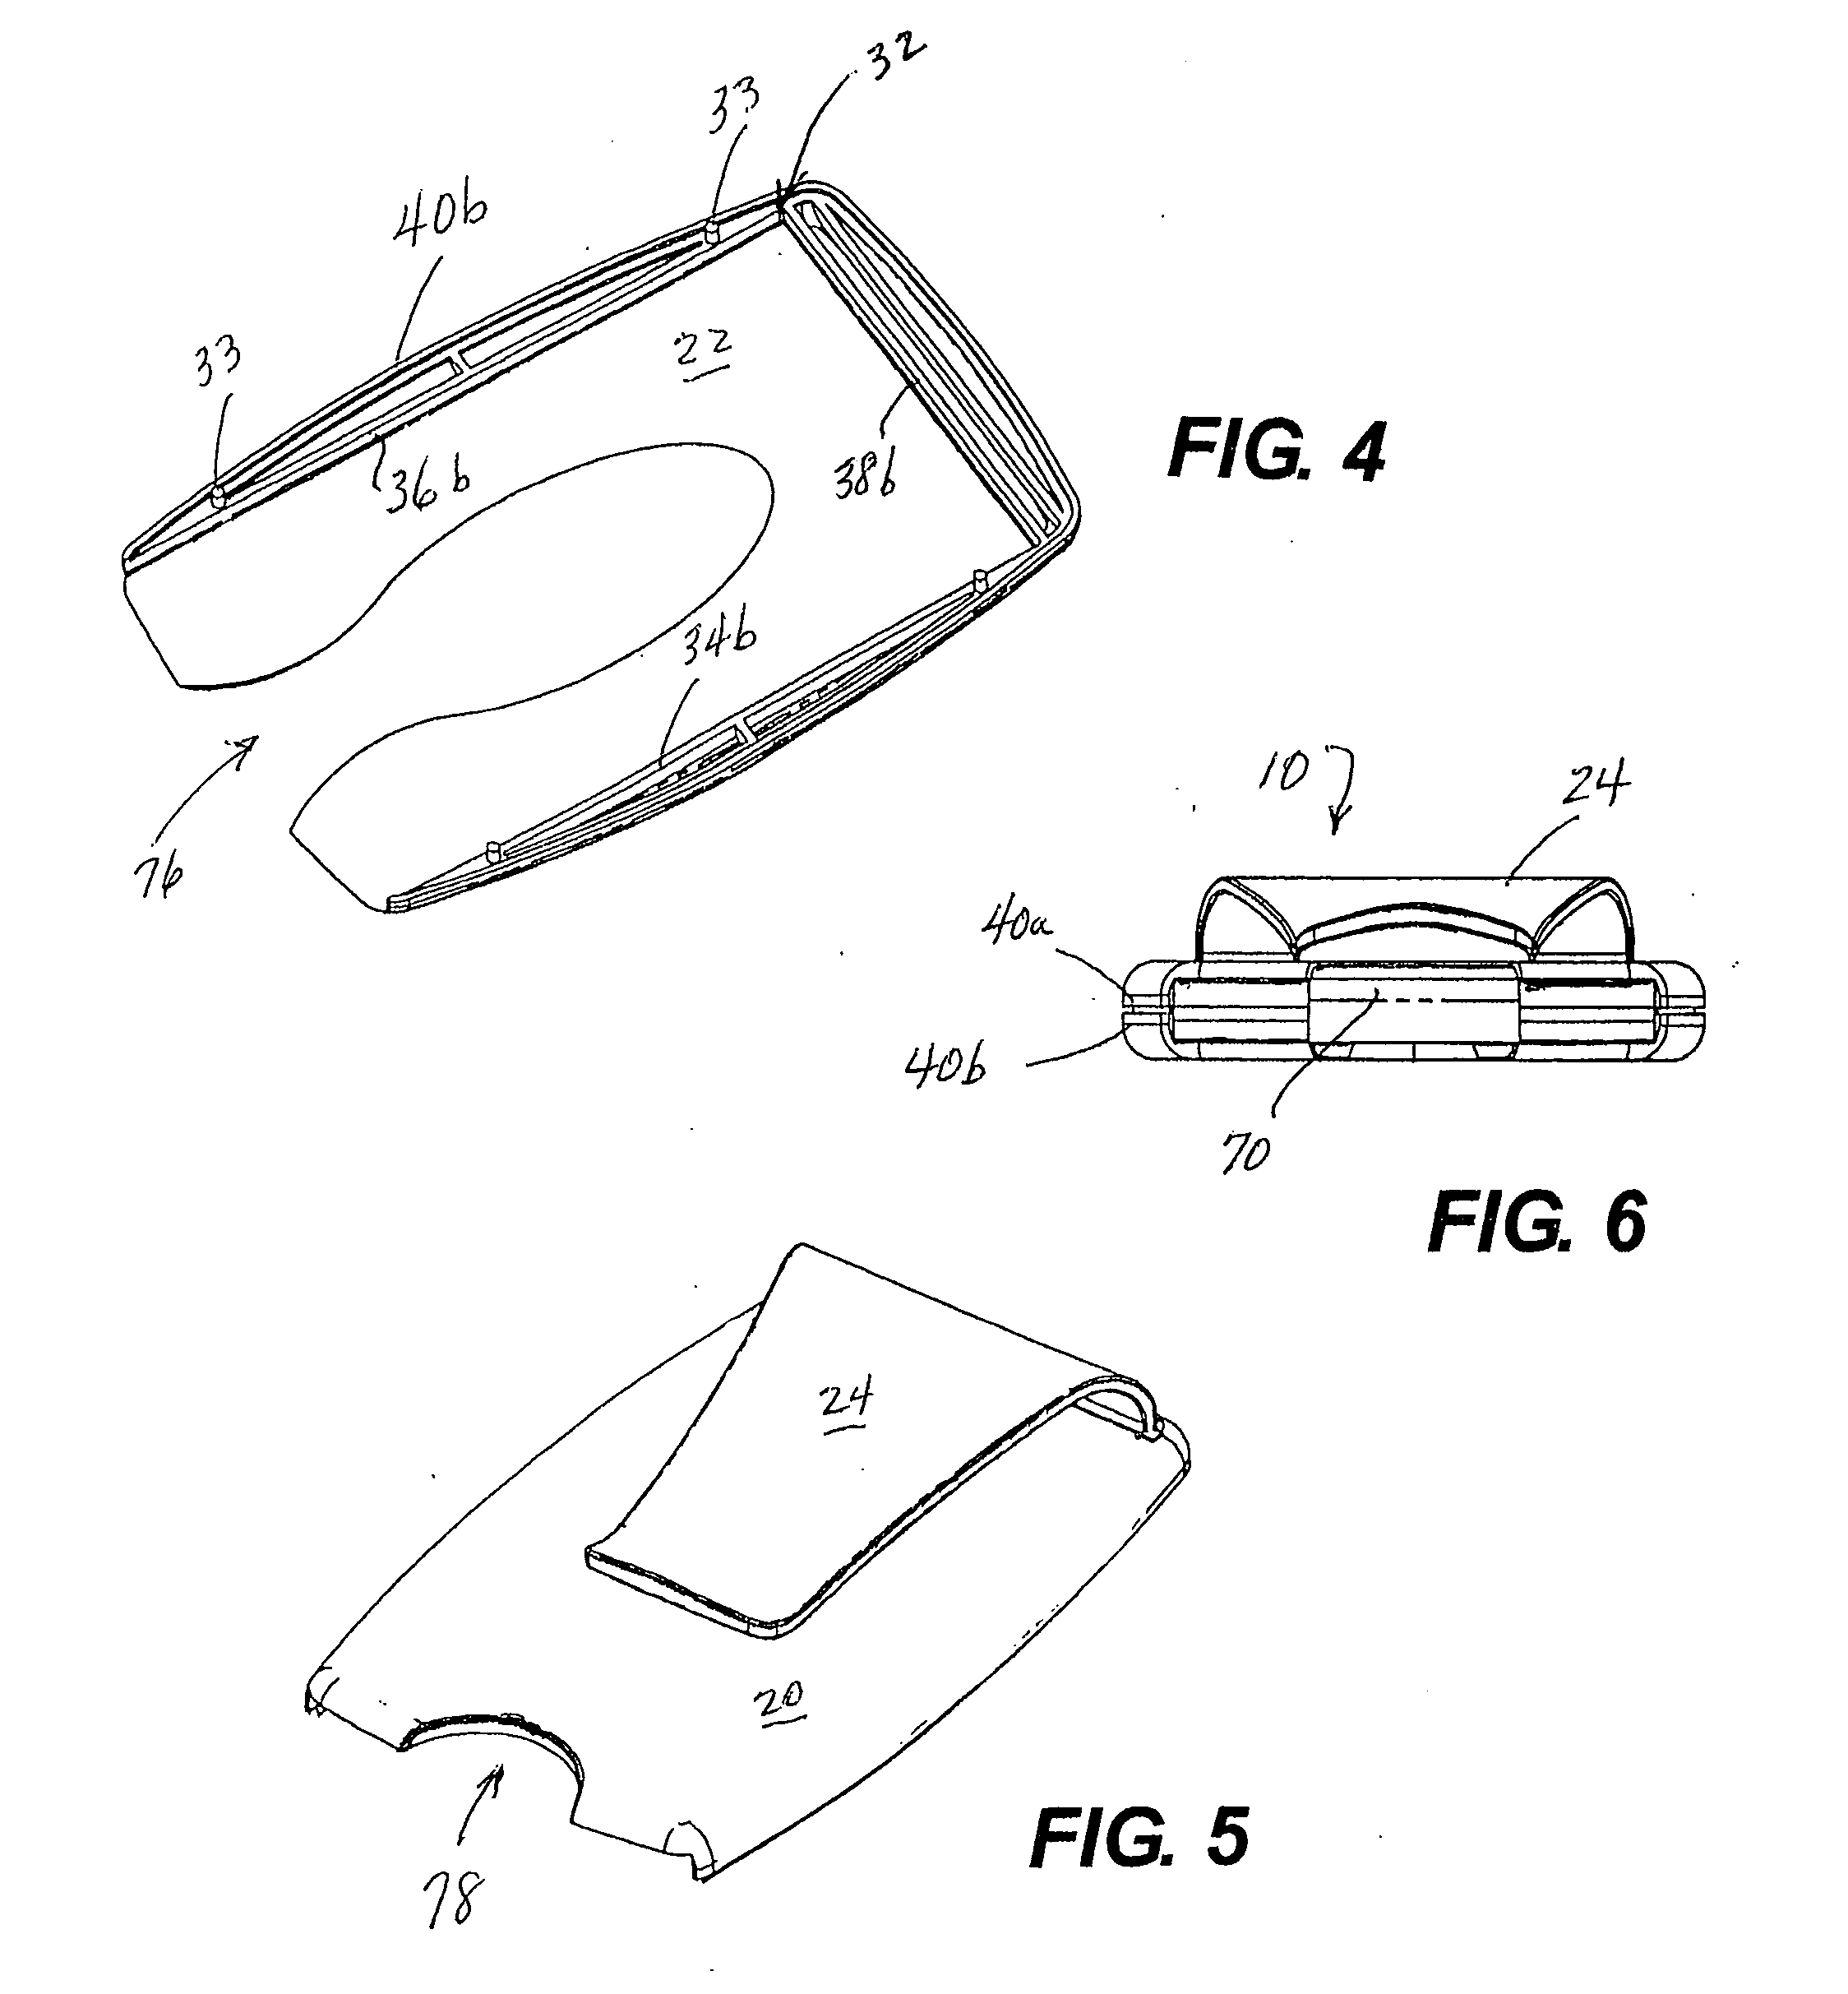 Card-holding and money clip device